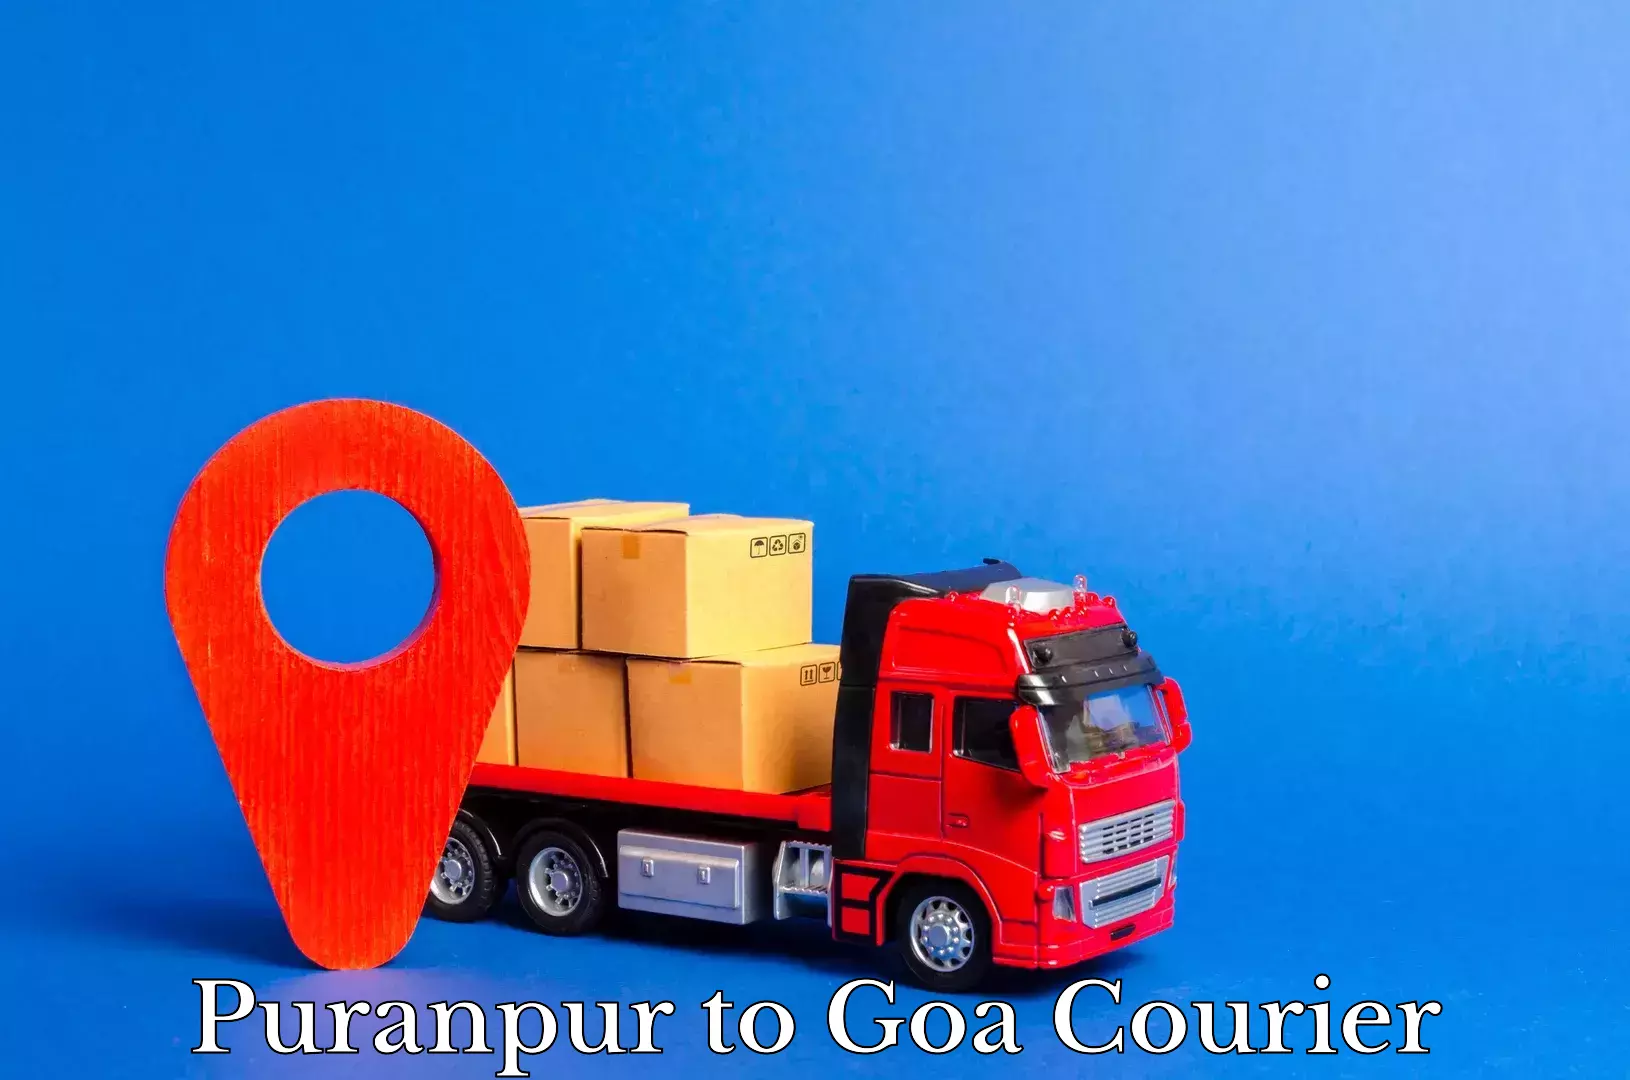 Express delivery network Puranpur to Goa